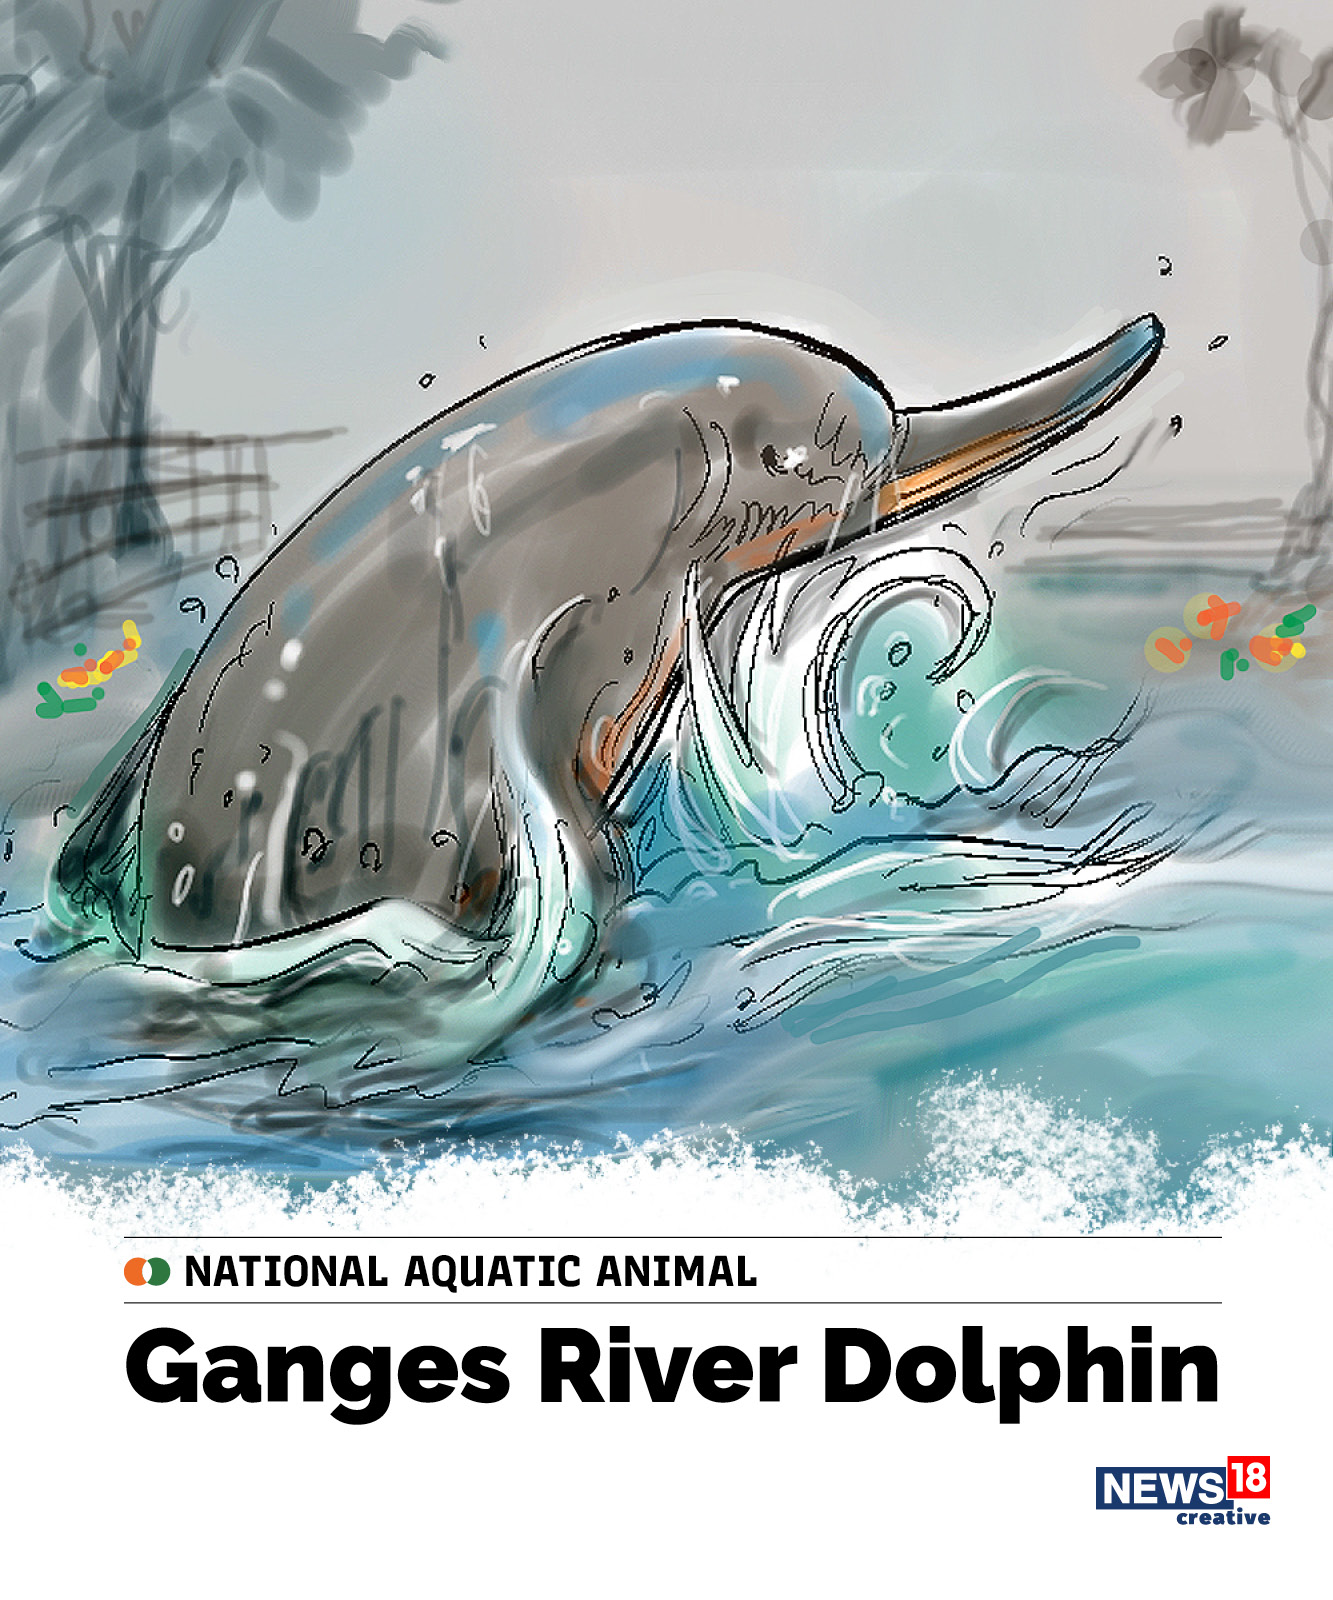 india's national aquatic animal, ganges river dolphin, india national symbols, india independence day